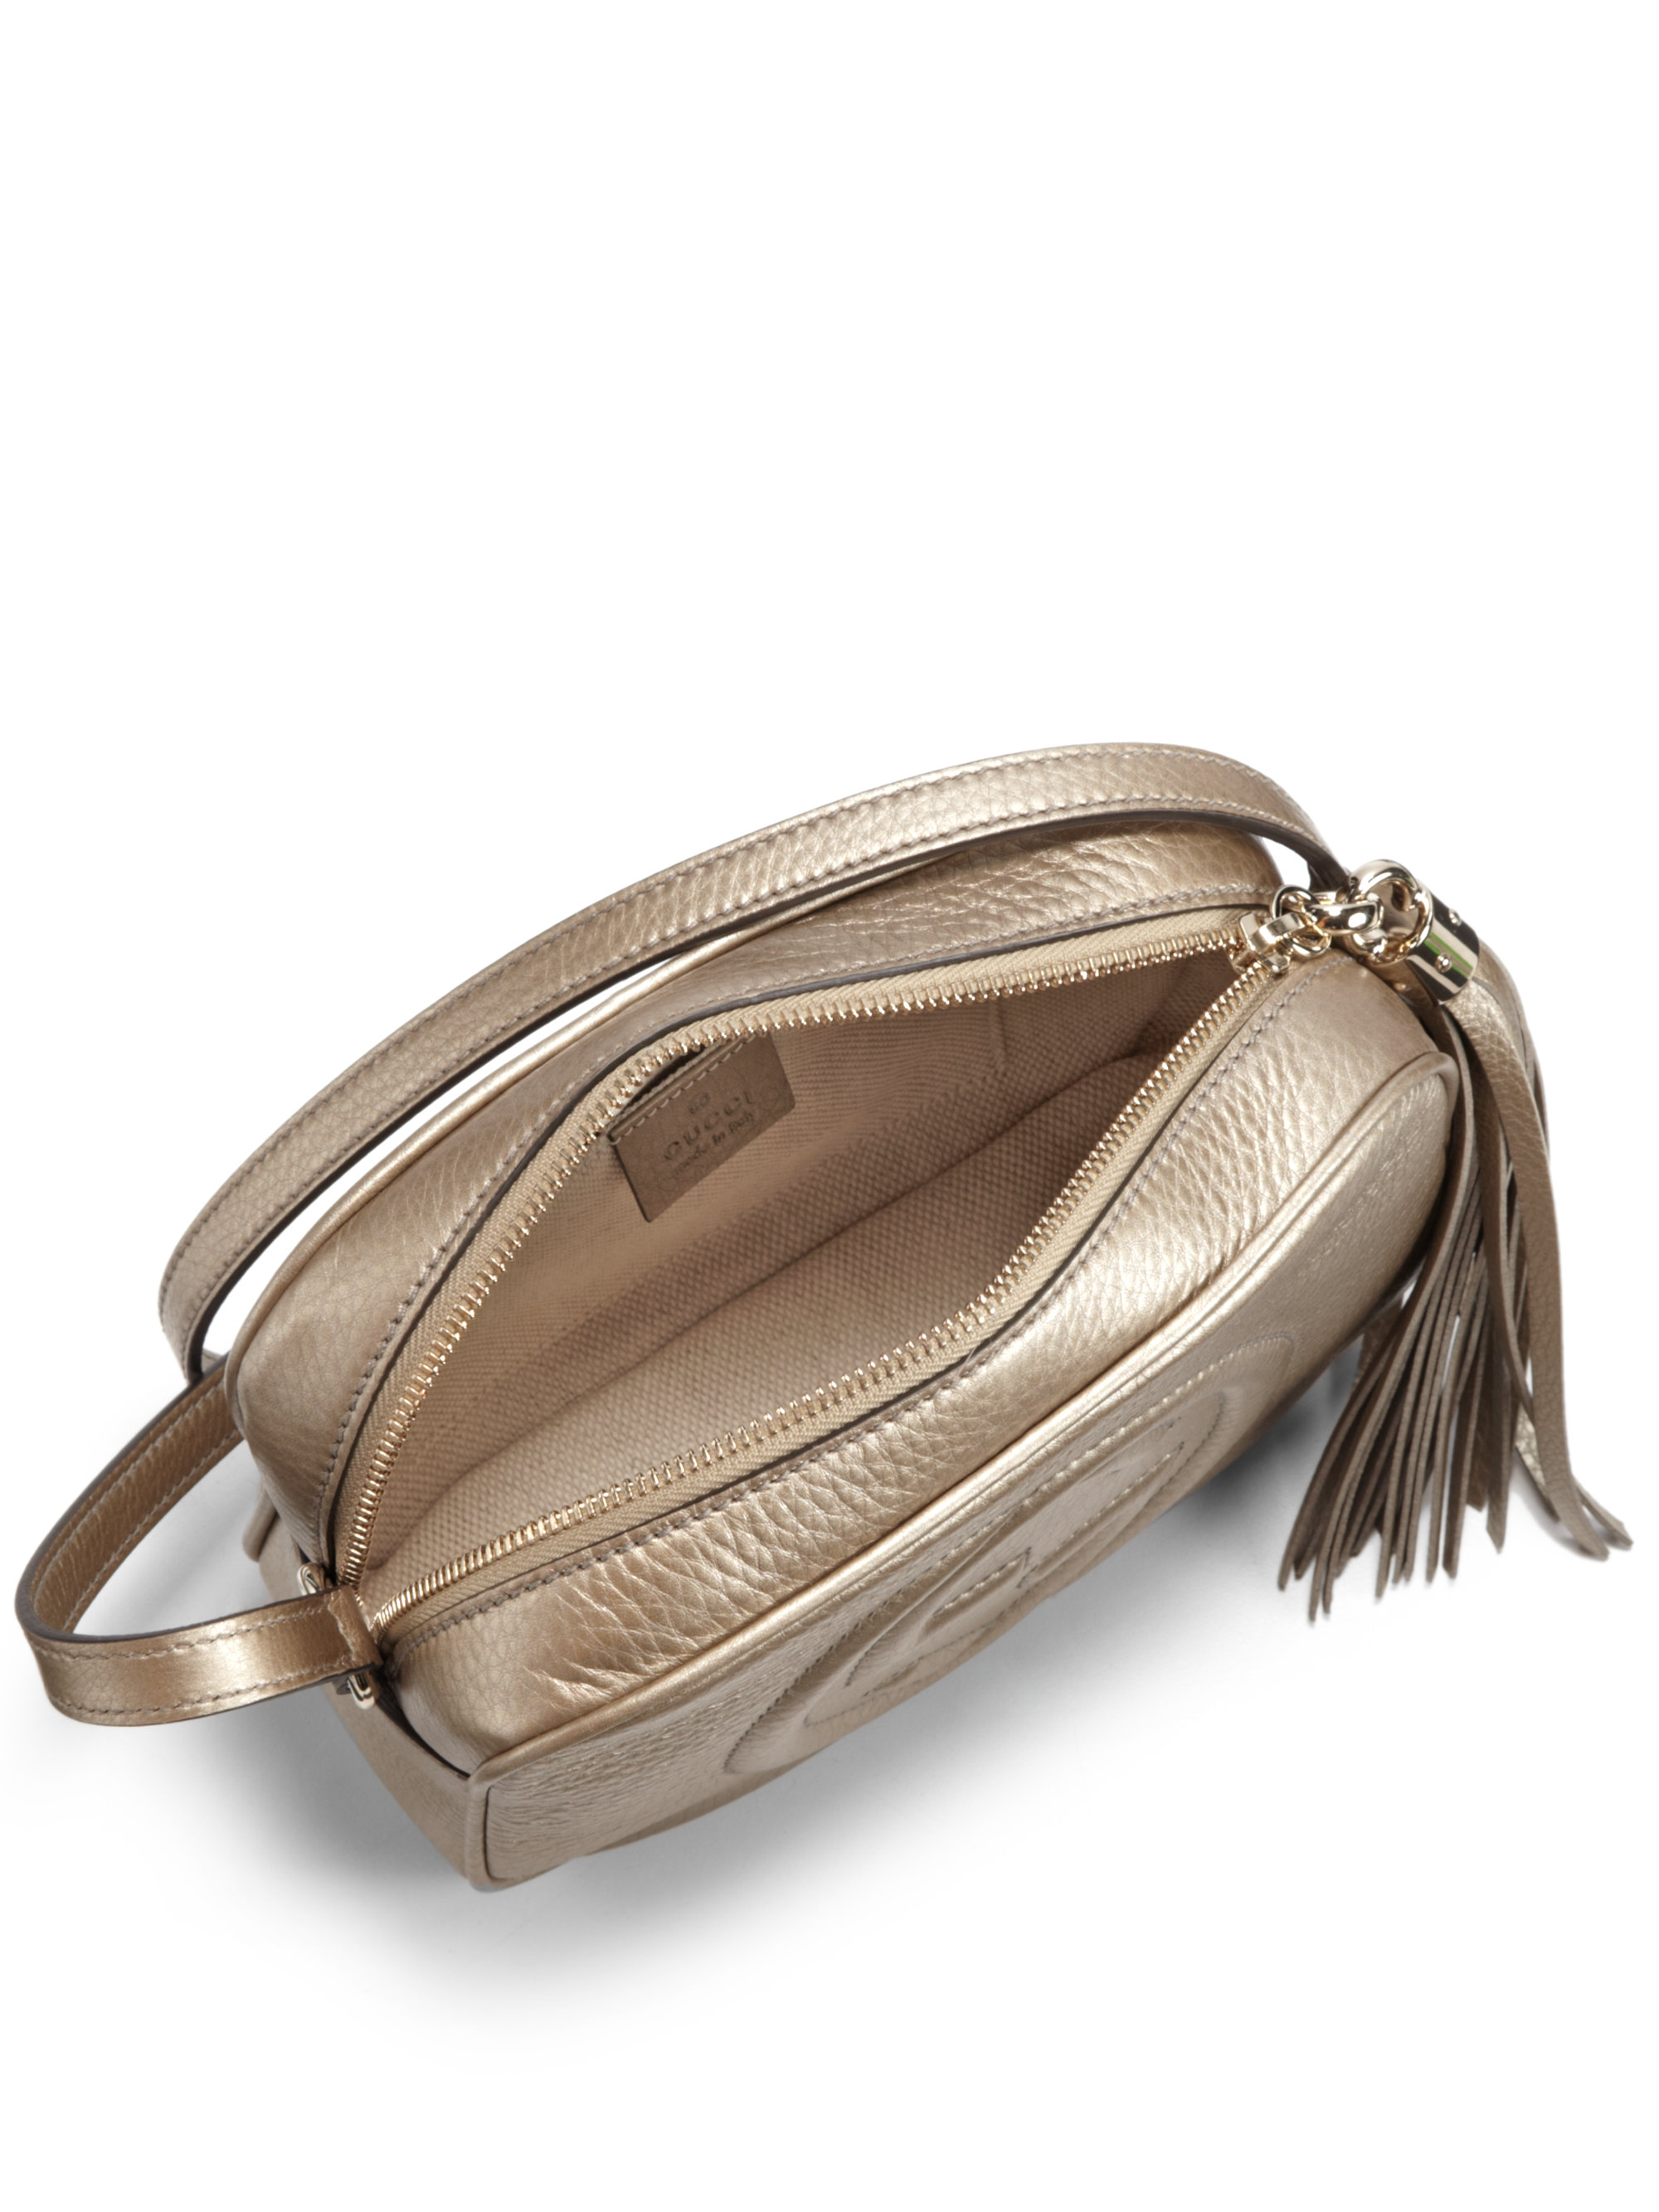 Gucci Soho Metallic Leather Disco Bag in Natural Lyst